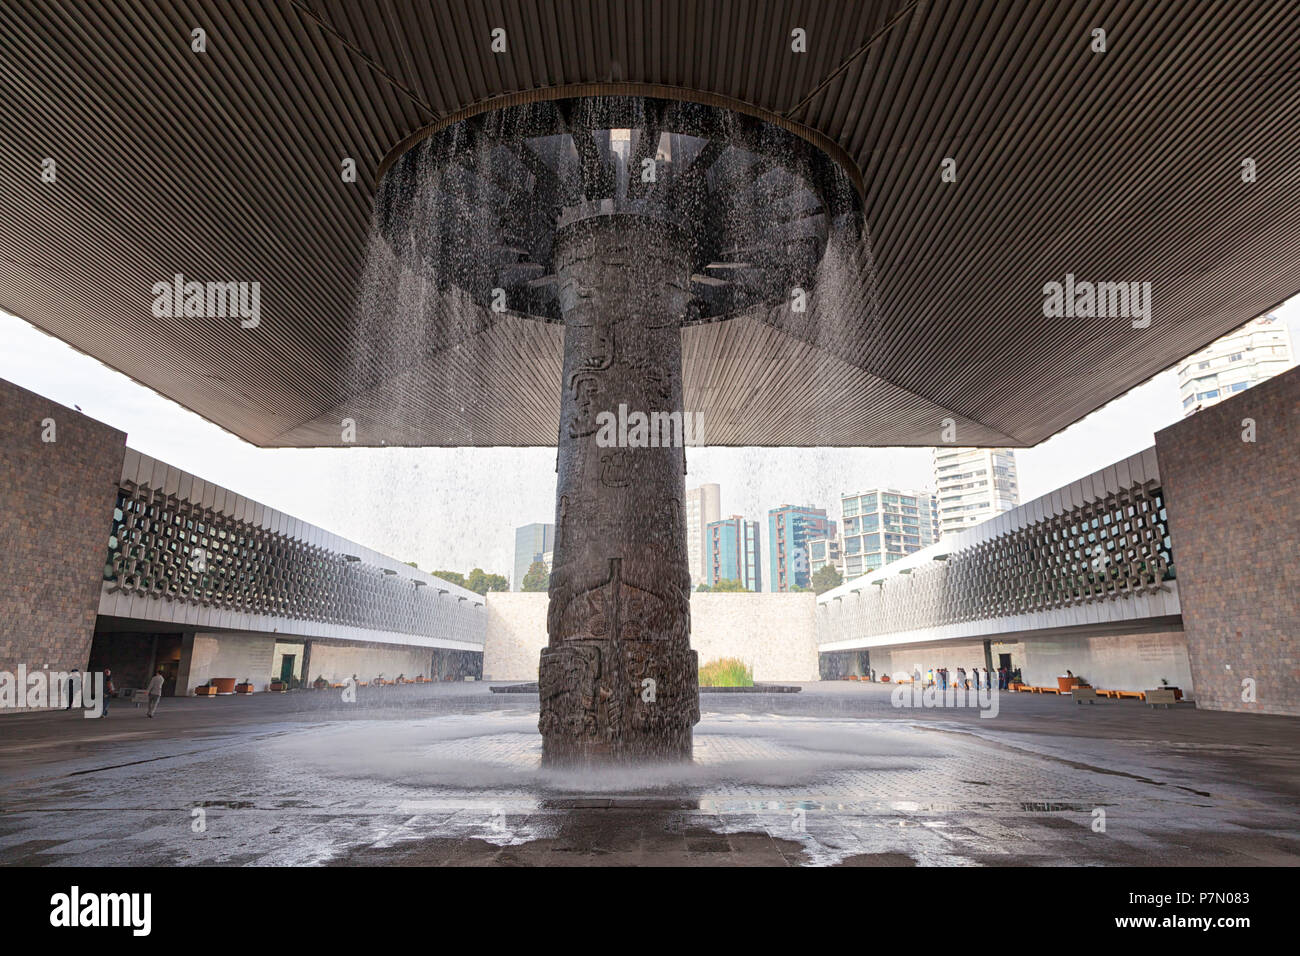 The courtyard of National Museum of Anthropology of Mexico City, Mexico City, Mexico DF, Mexico, Stock Photo